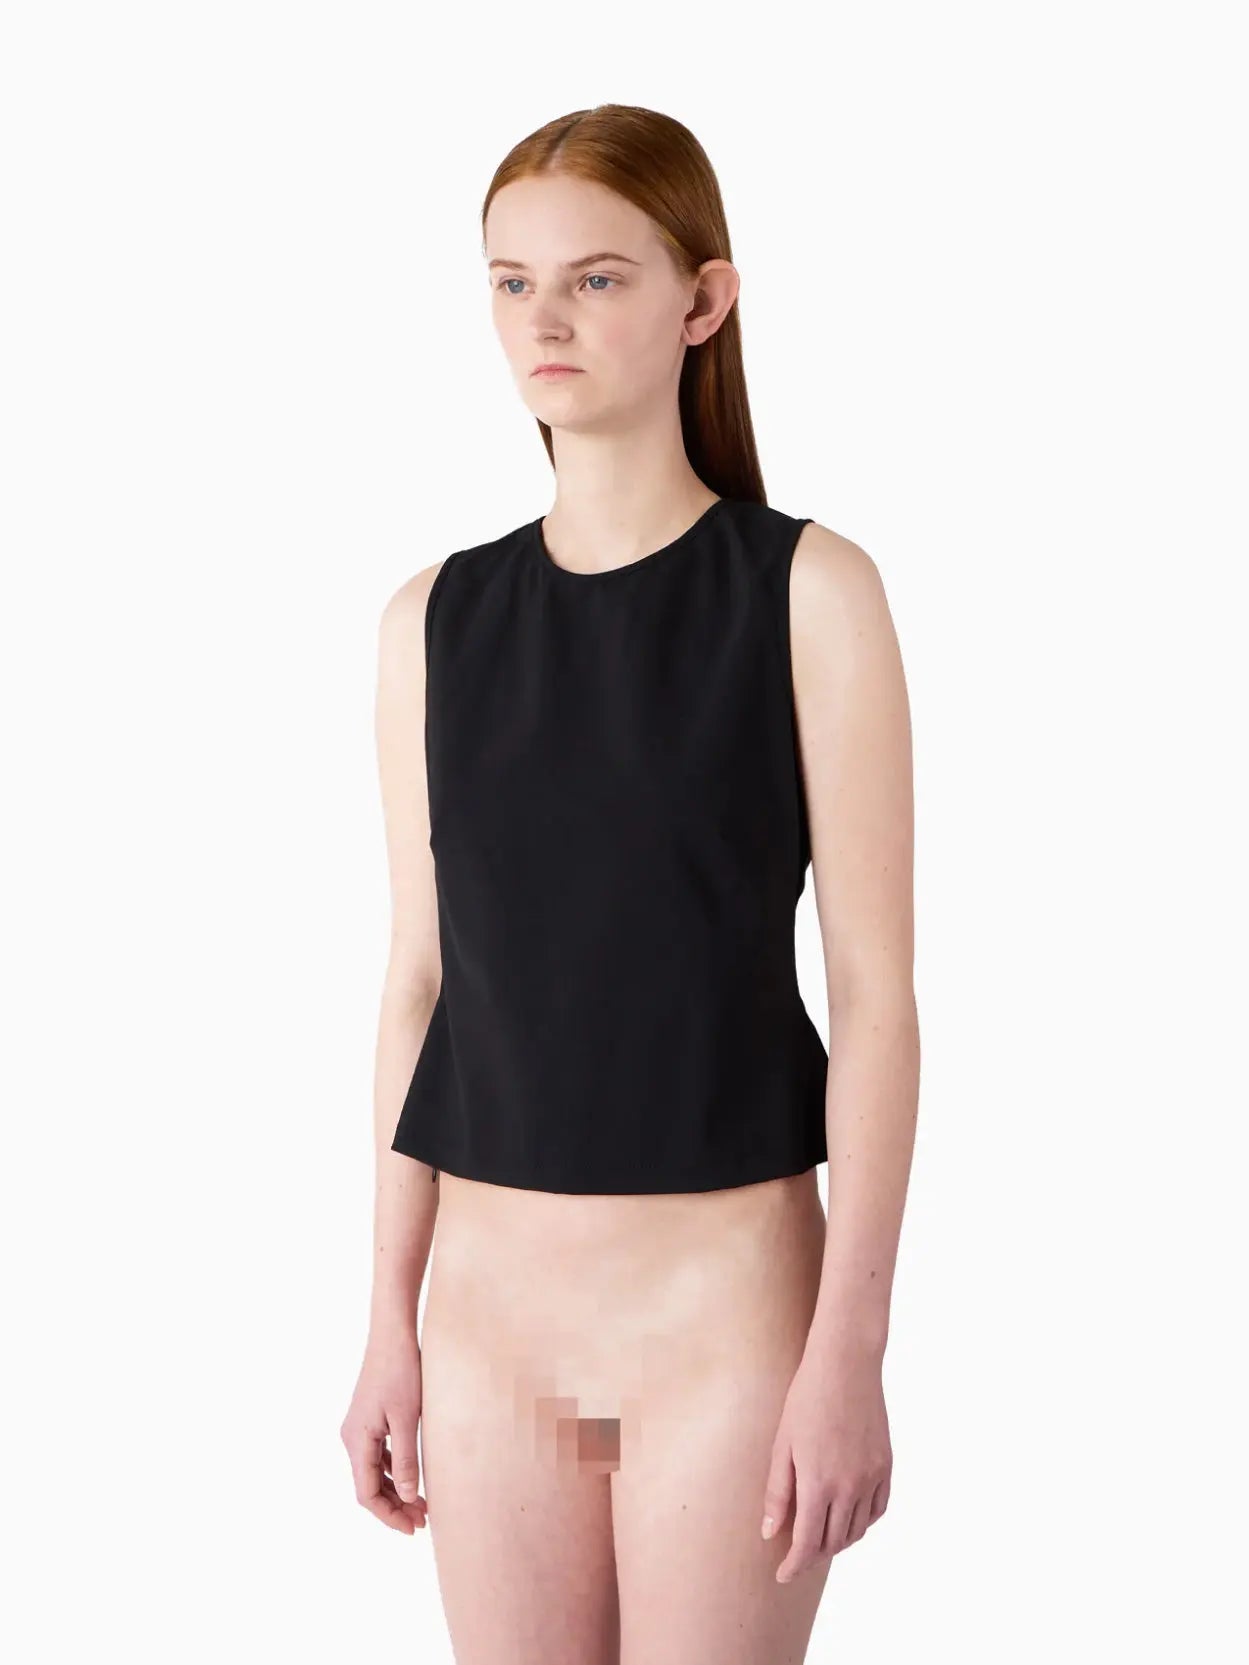 A black sleeveless top with a round neckline and a small back keyhole opening secured by a tie. The Buco Top Black by Sunnei, available at Bassalstore in Barcelona, boasts a simple, minimalist design.